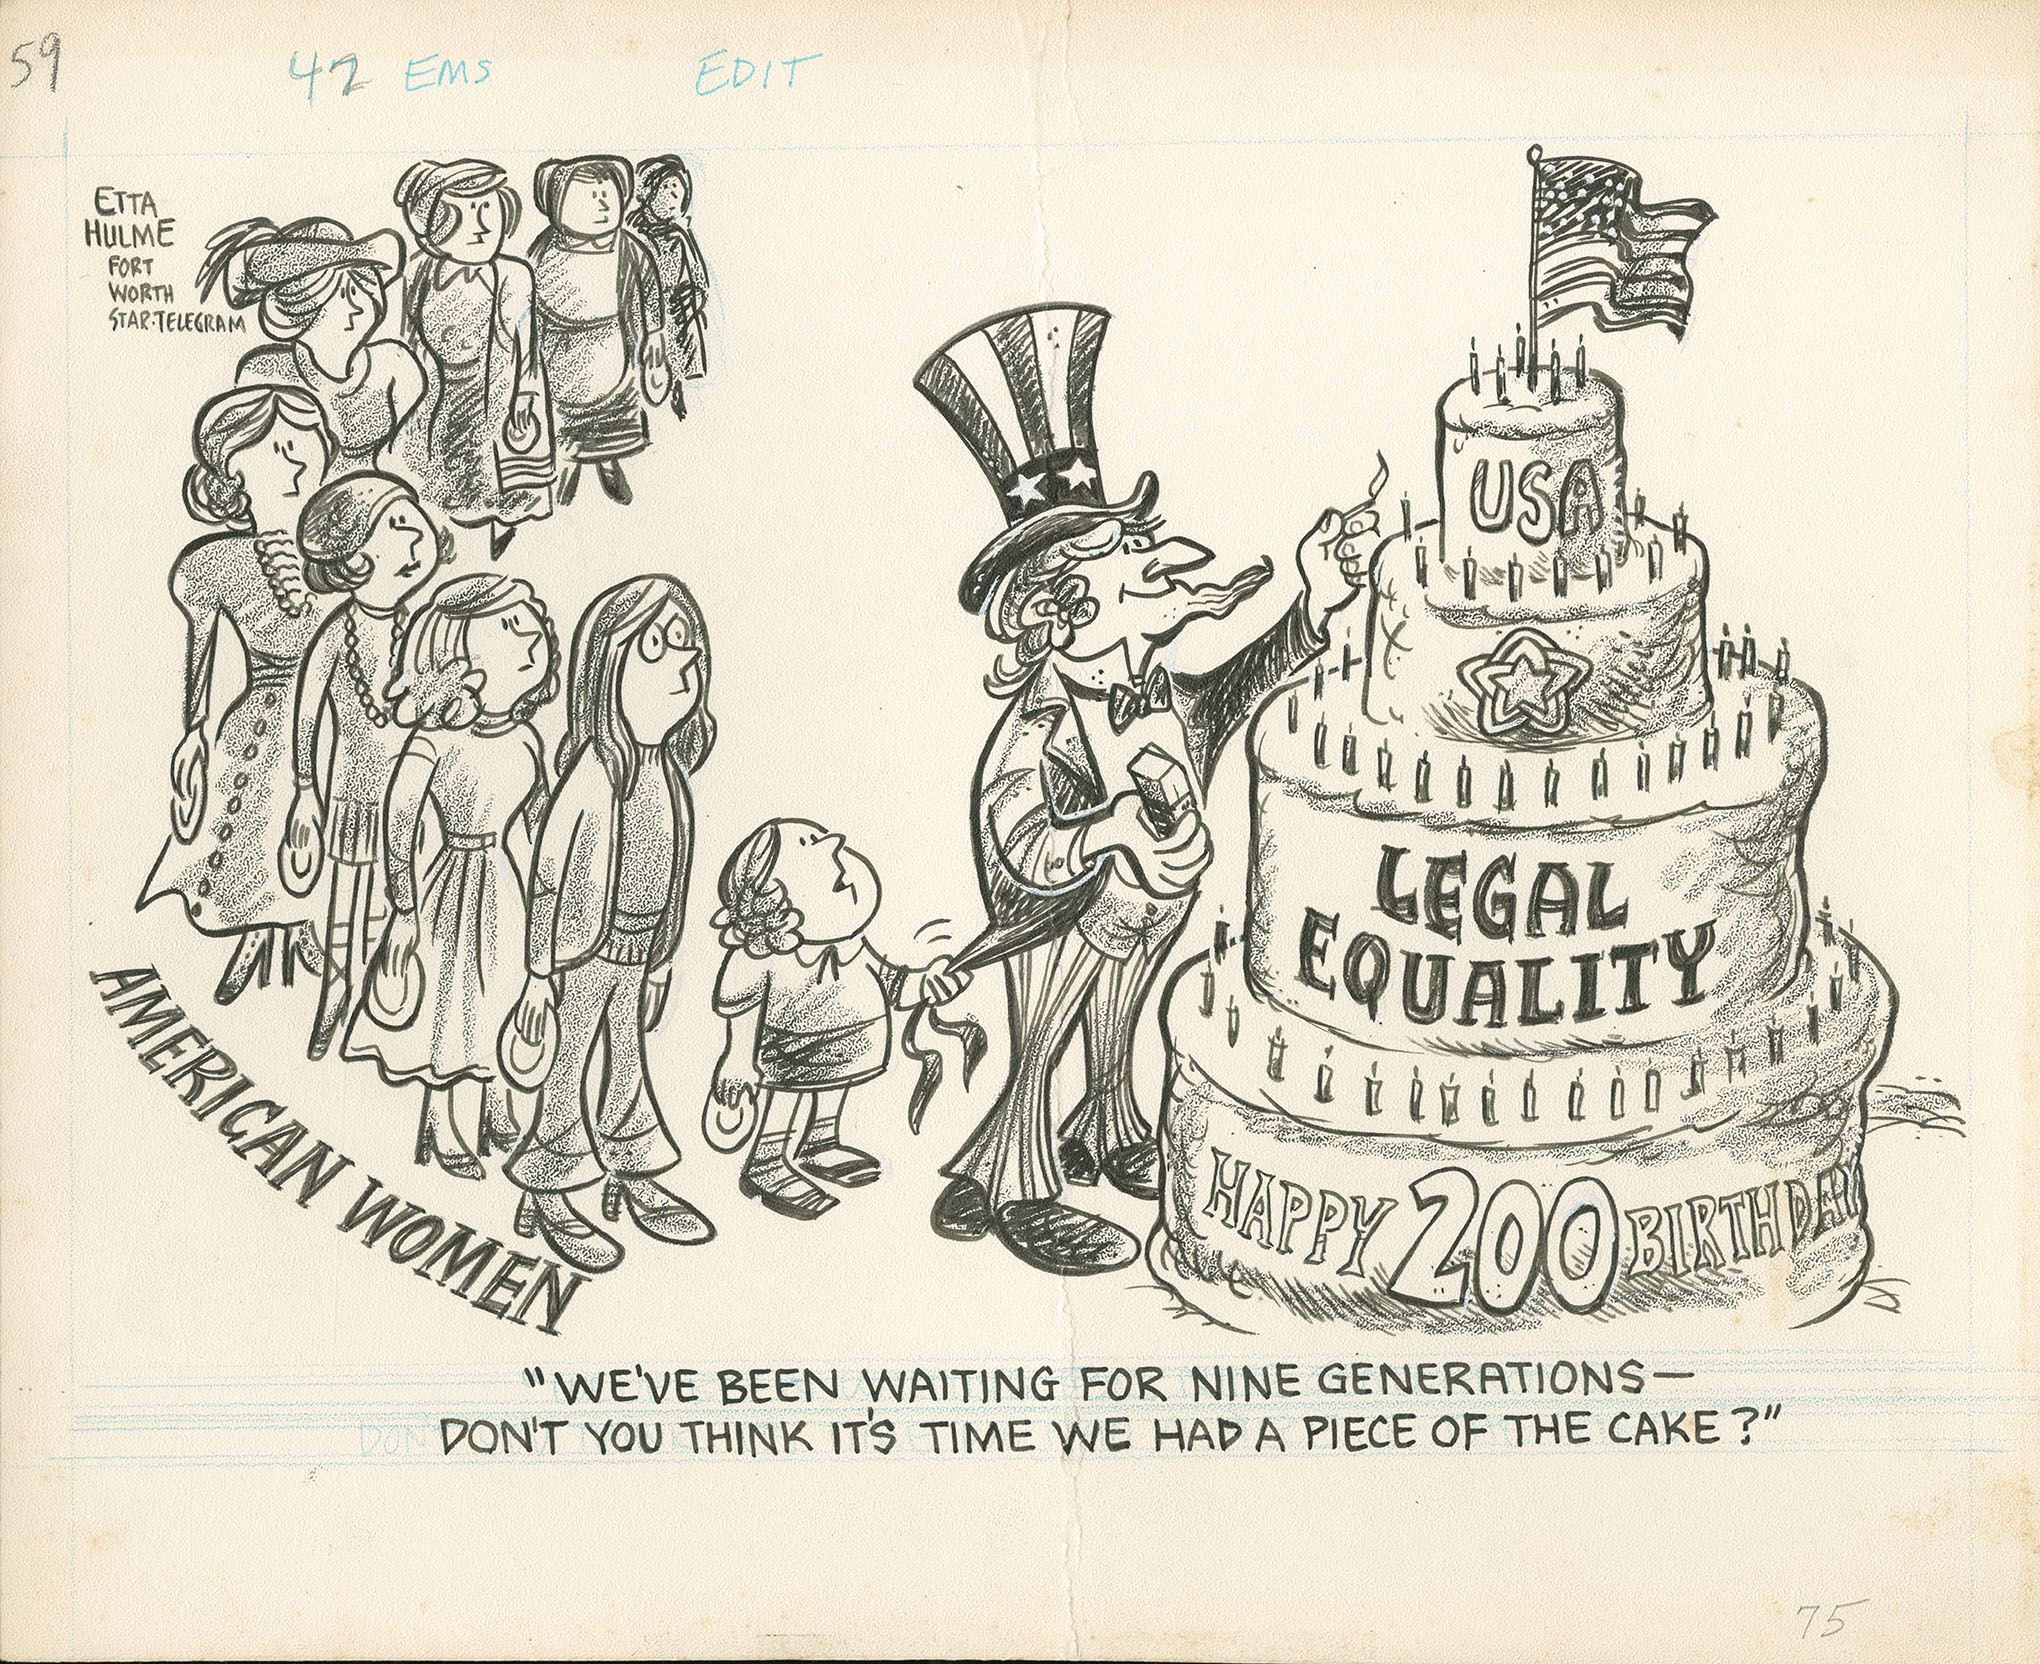 Political cartoon by Etta Hulme. American women are seen lining up for a slices of cake from Uncle Sam. The cake is labelled "Legal Equality." The caption reads: "We've have been waiting nine generations - don't you think it's time time we had a piece of cake?"